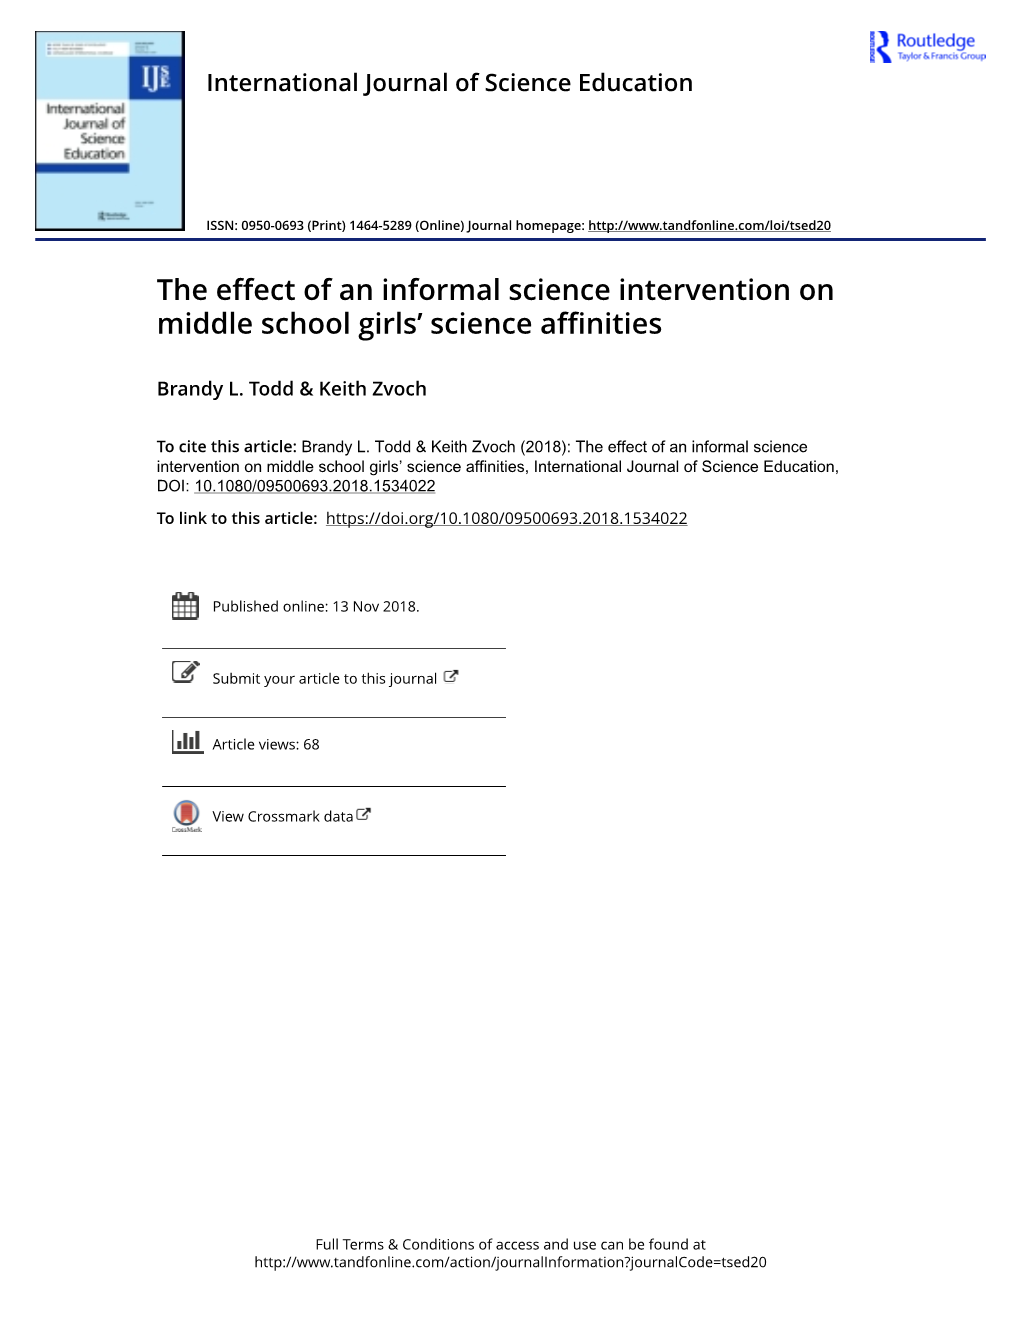 The Effect of an Informal Science Intervention on Middle School Girls' Science Affinities